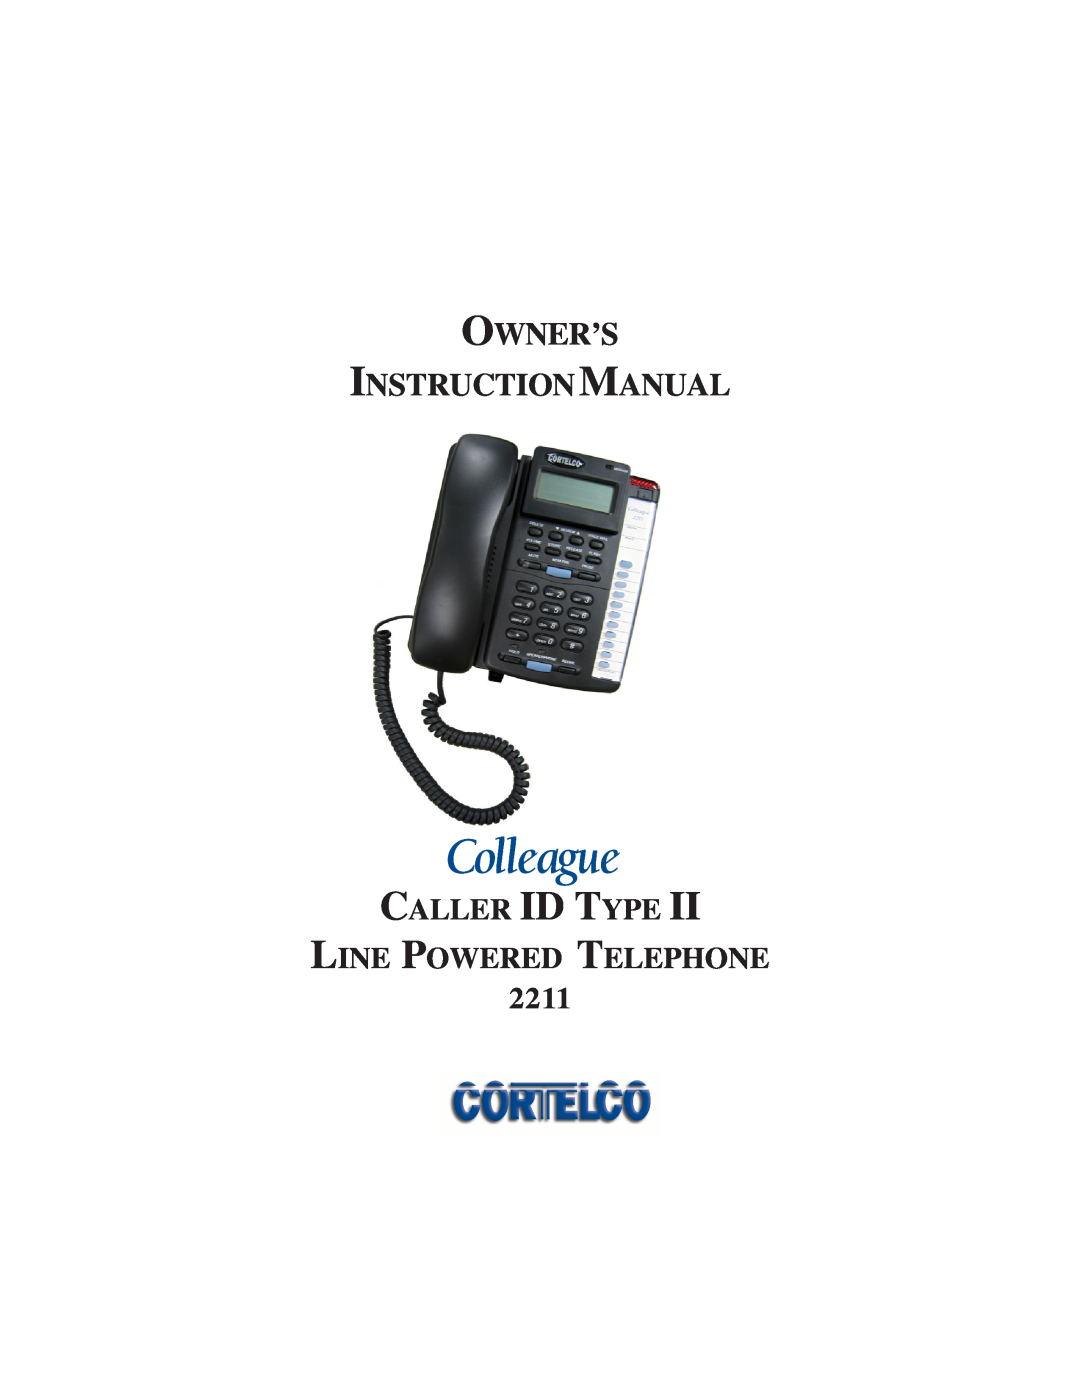 Cortelco instruction manual CALLER ID TYPE LINE POWERED TELEPHONE 2211 